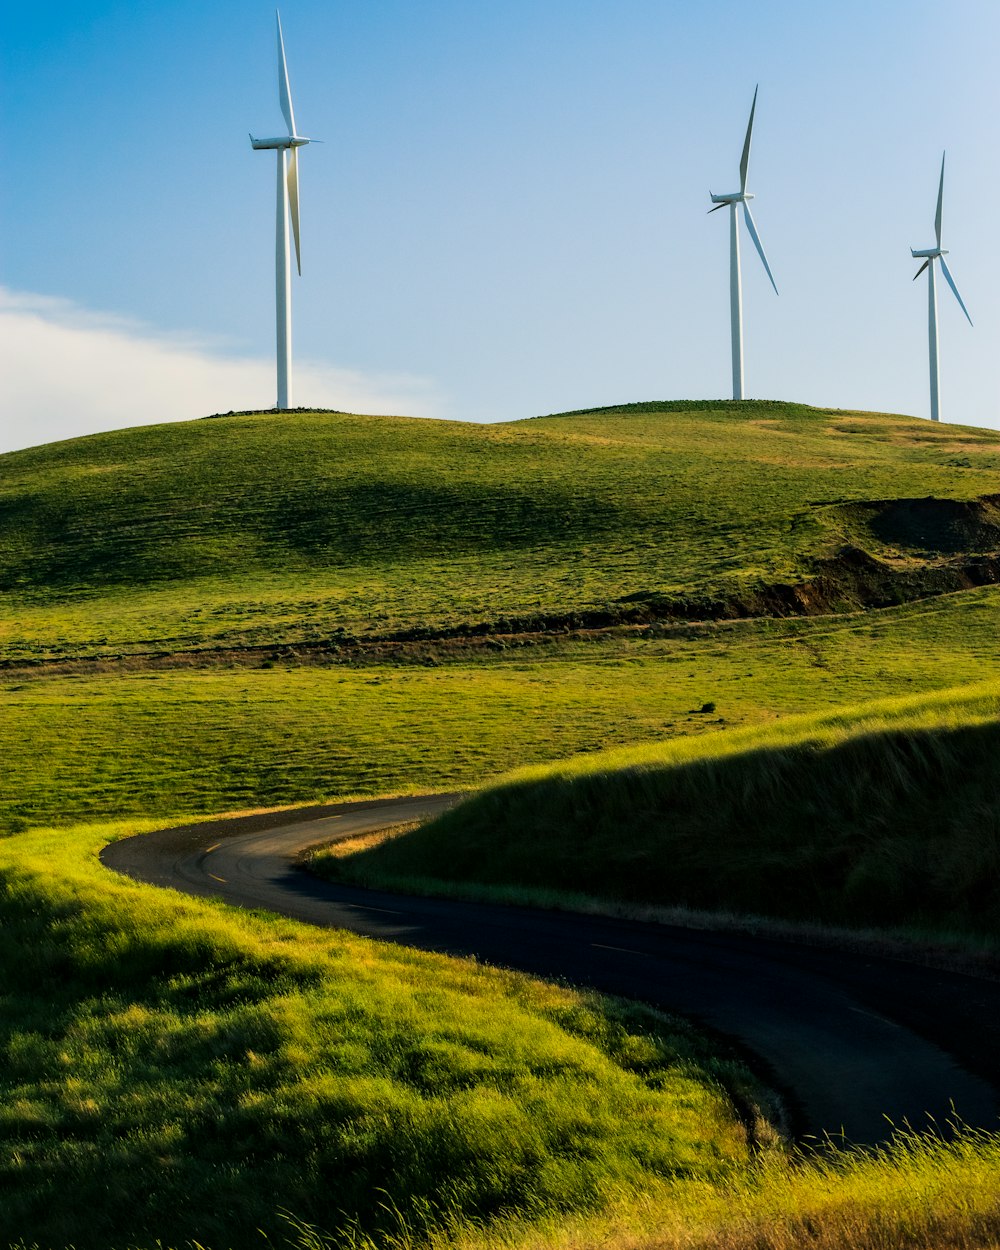 a grassy hill with three wind turbines on top of it